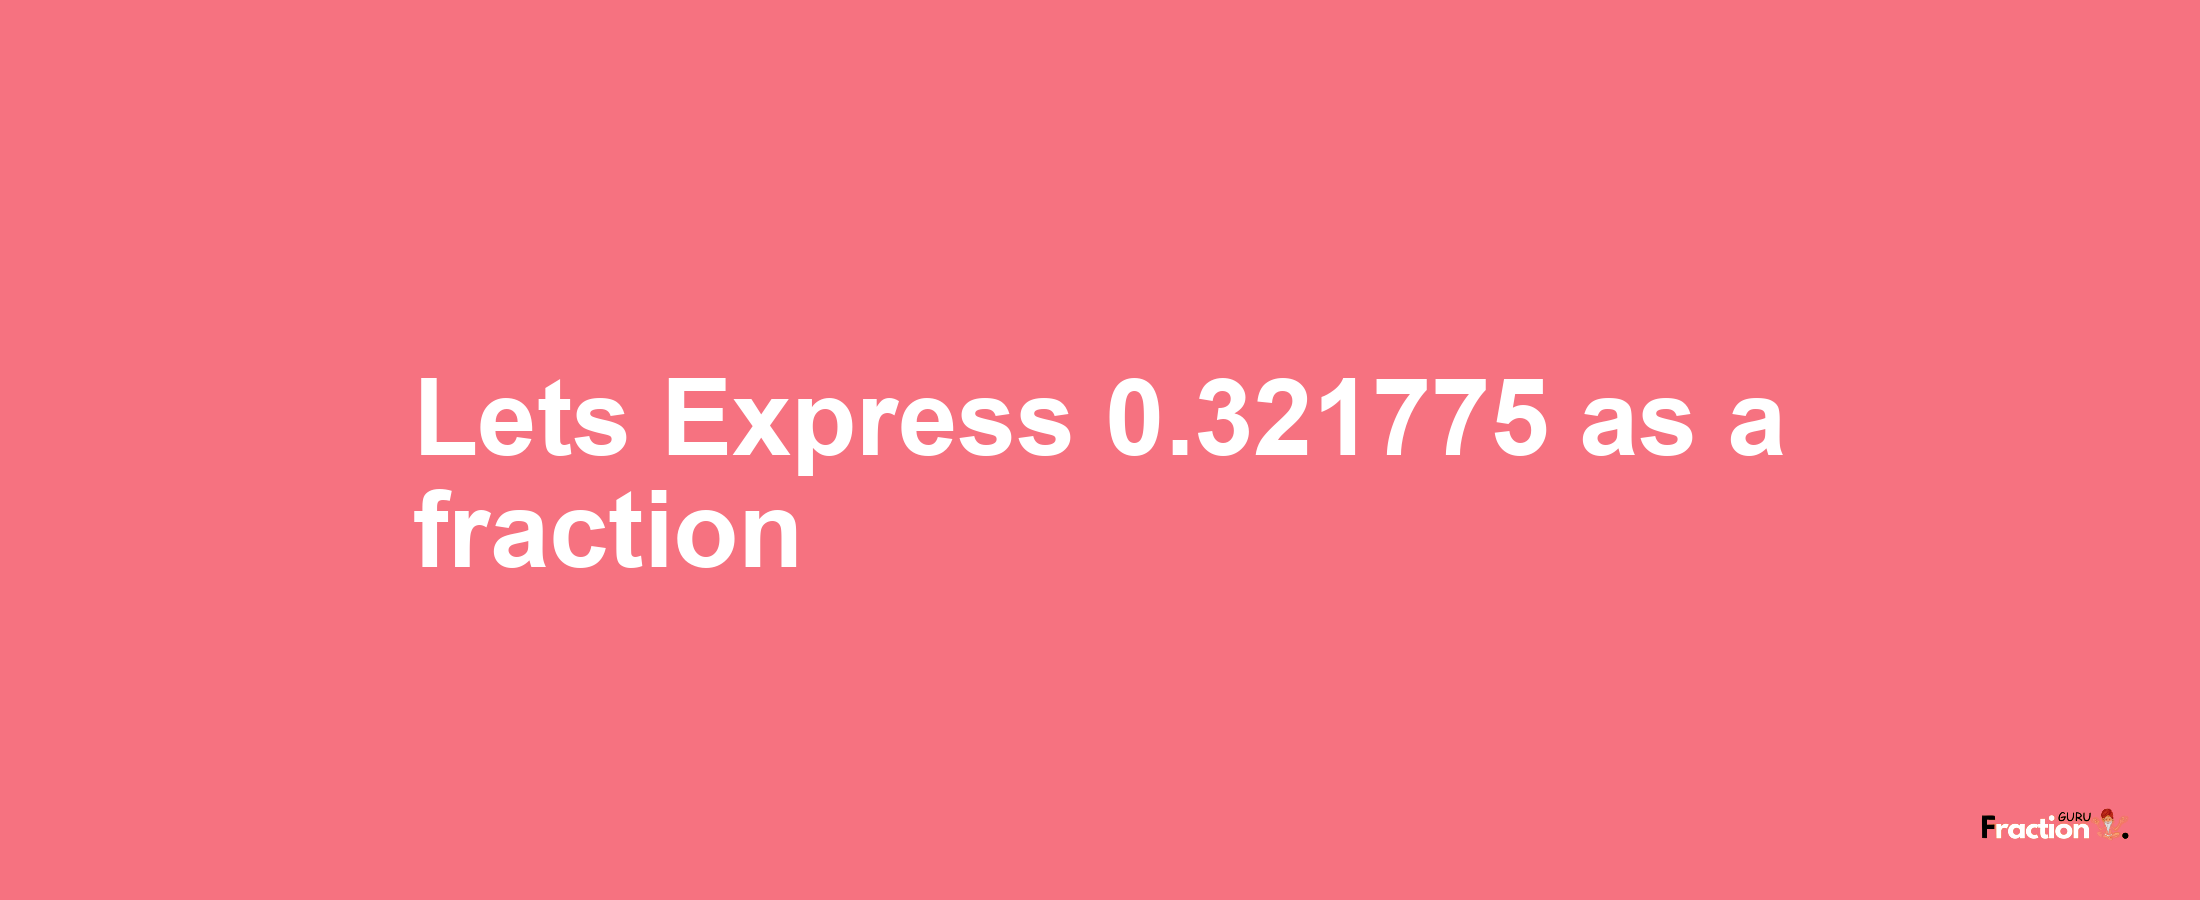 Lets Express 0.321775 as afraction